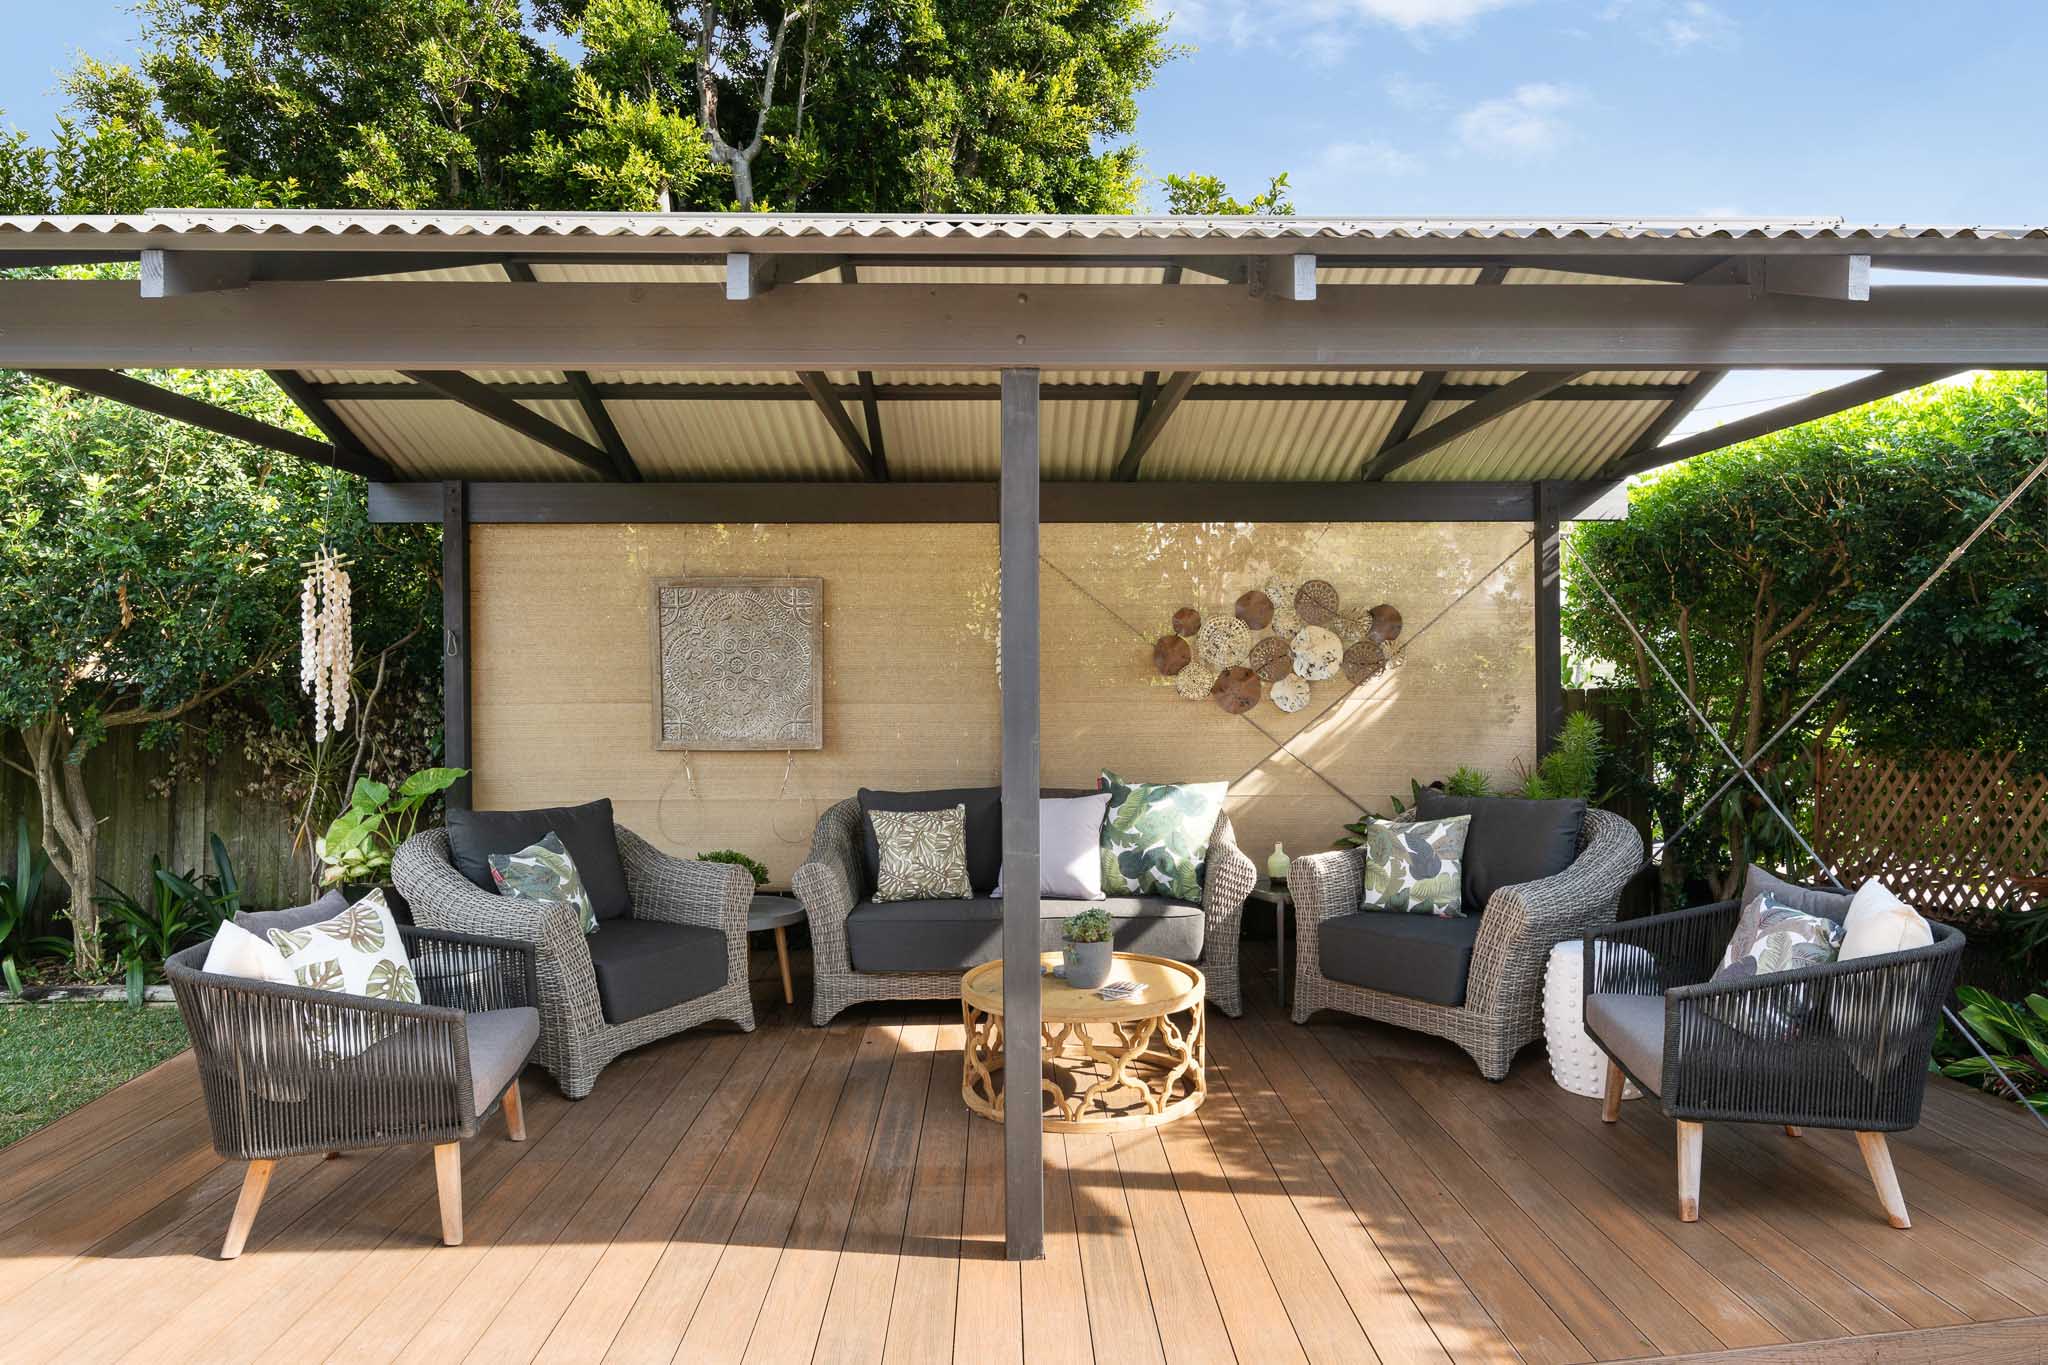 Dark gray patio furniture with a shady pergola above Teak composite decking boards